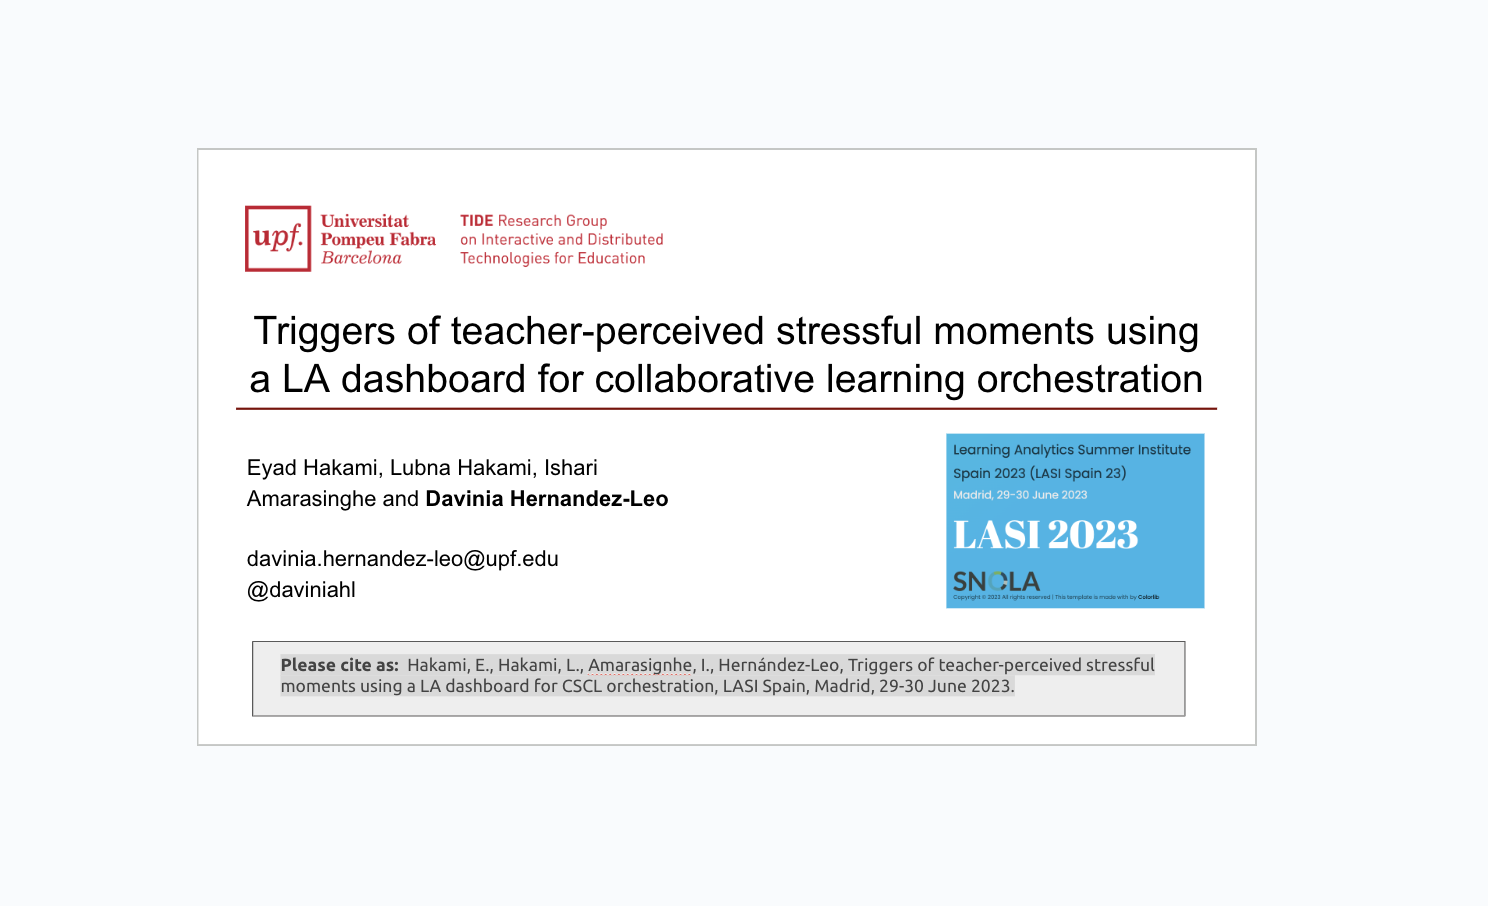 TIDE at LASI Spain: Triggers of teacher-perceived stressful moments using a LA dashboard for CSCL orchestration